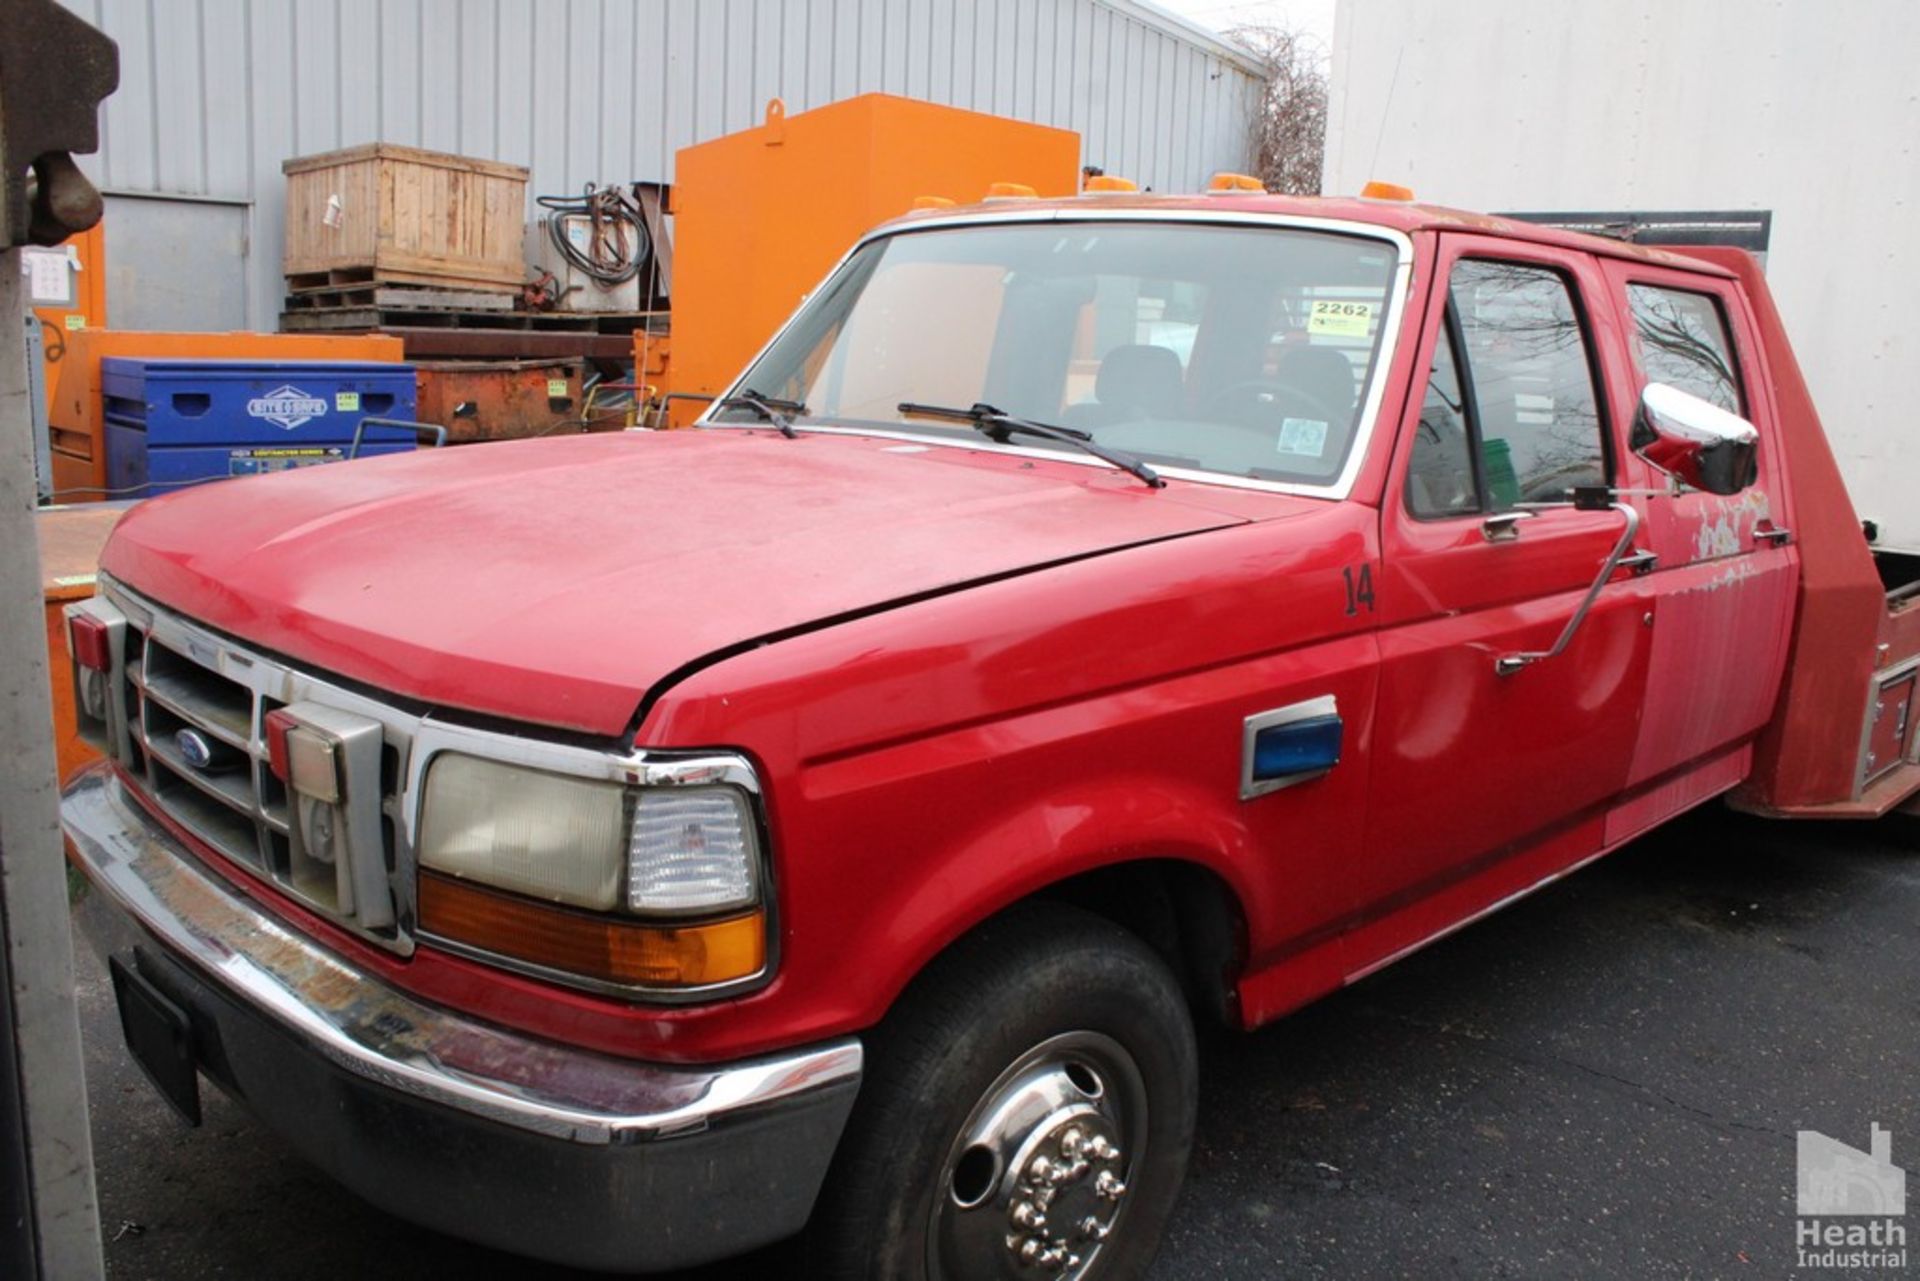 FORD F350 CREW CAB FIFTH WHEEL TOTER | GAS |CB RADIO | VIN 2FTJW35M2NCA25224 (1992) | INDICATED